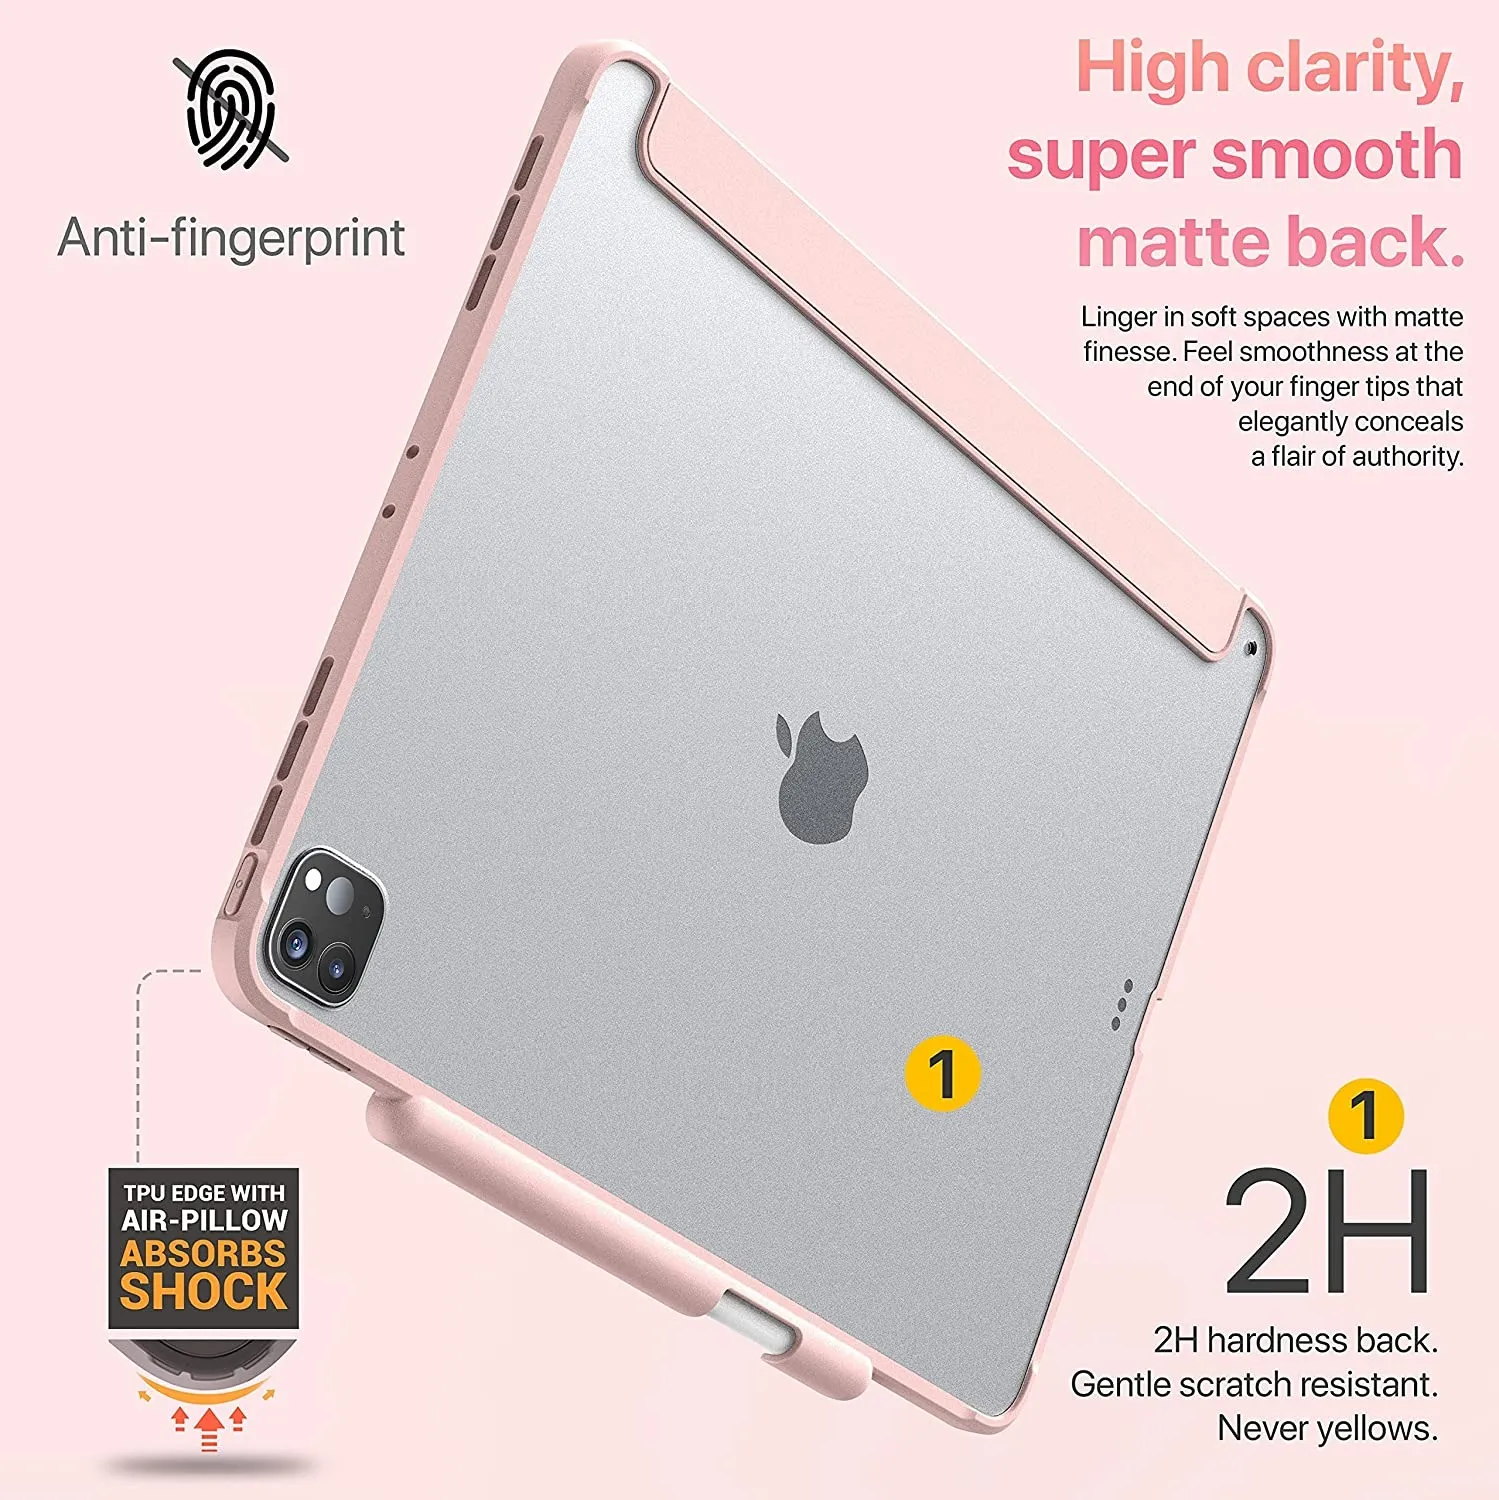 Case for iPad Pro 11 Inch 4th Generation 2022 with Pencil Holder,  Protective Cover with Soft Smooth TPU Back, Also Fit for iPad 11 Pro Case  3rd Generation 2021 /2nd Generation 2020 